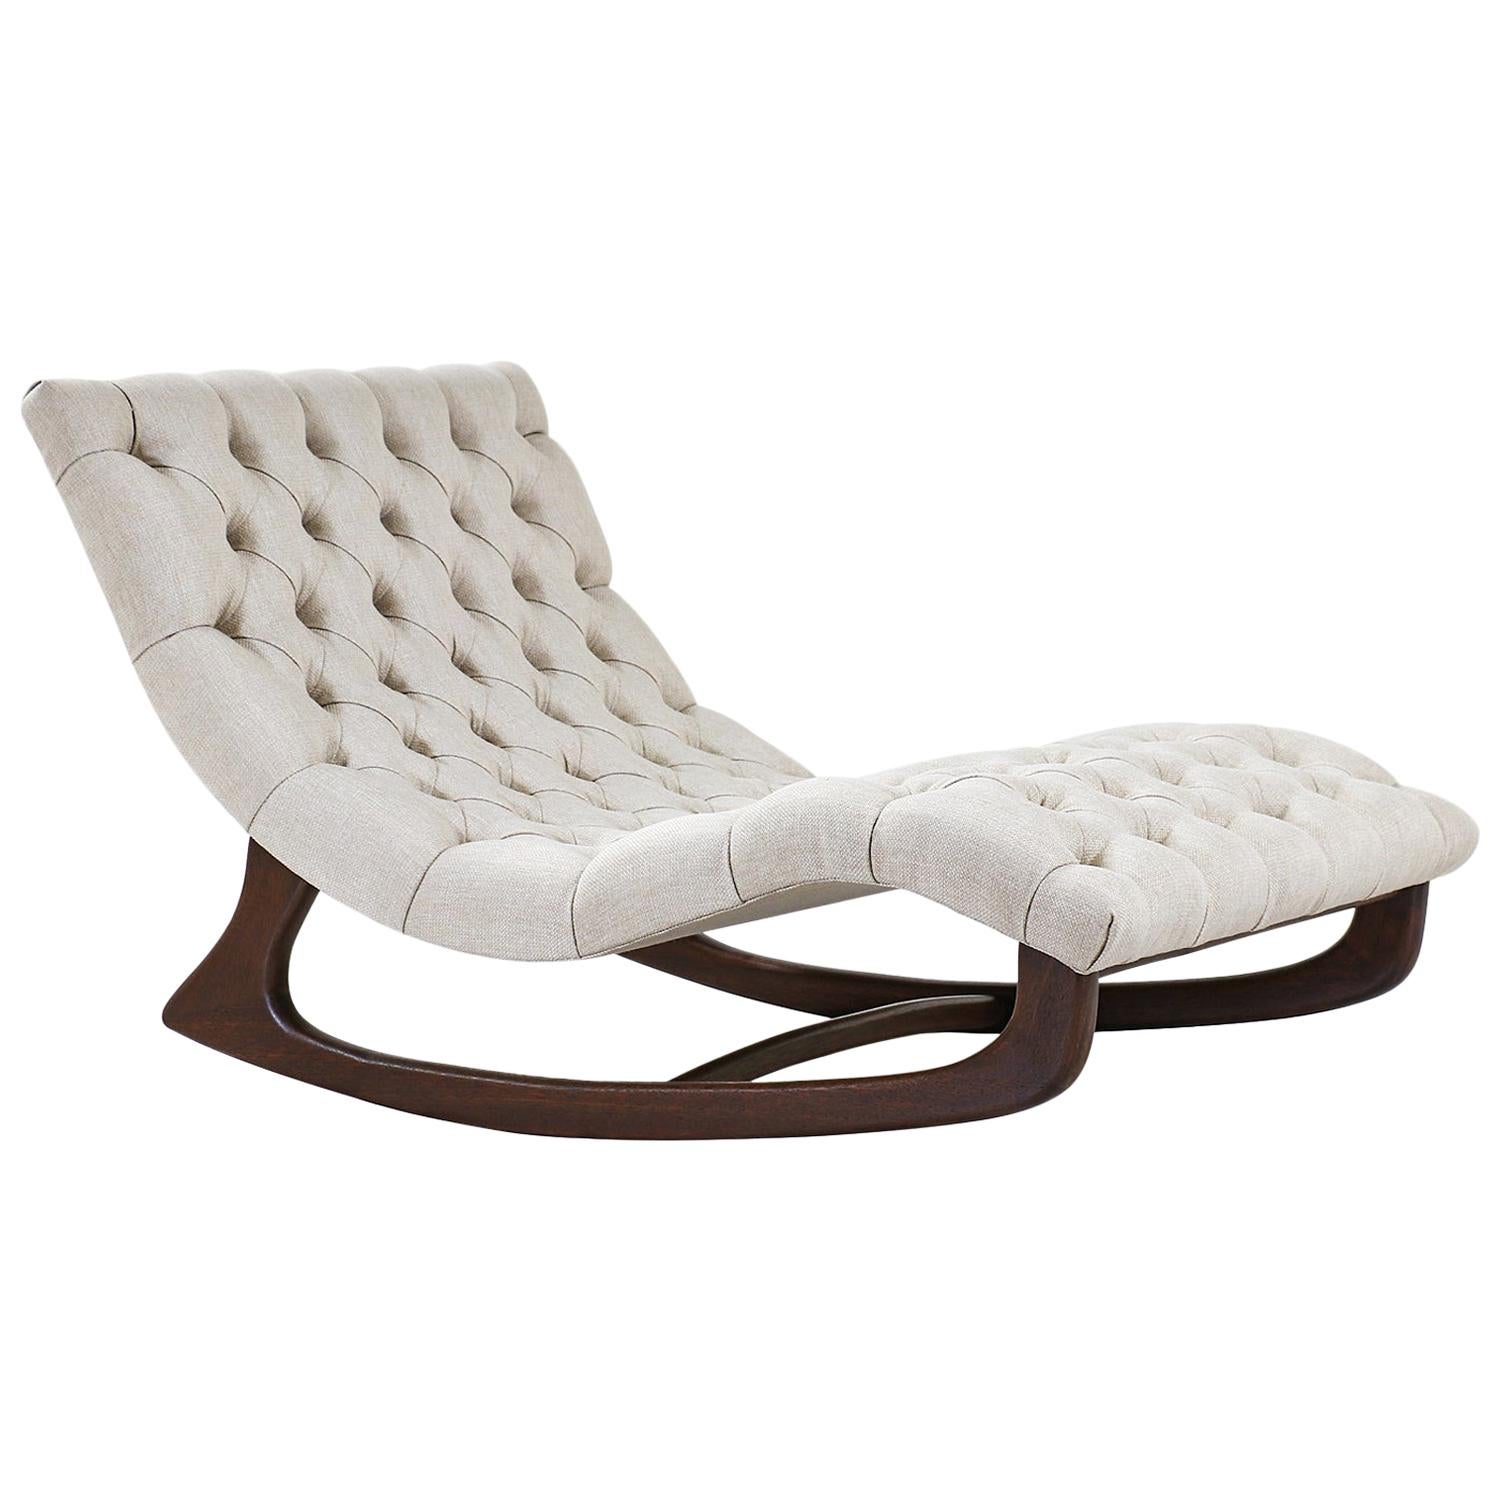 Adrian Pearsall Tufted Chaise Lounge Chair for Craft Associates